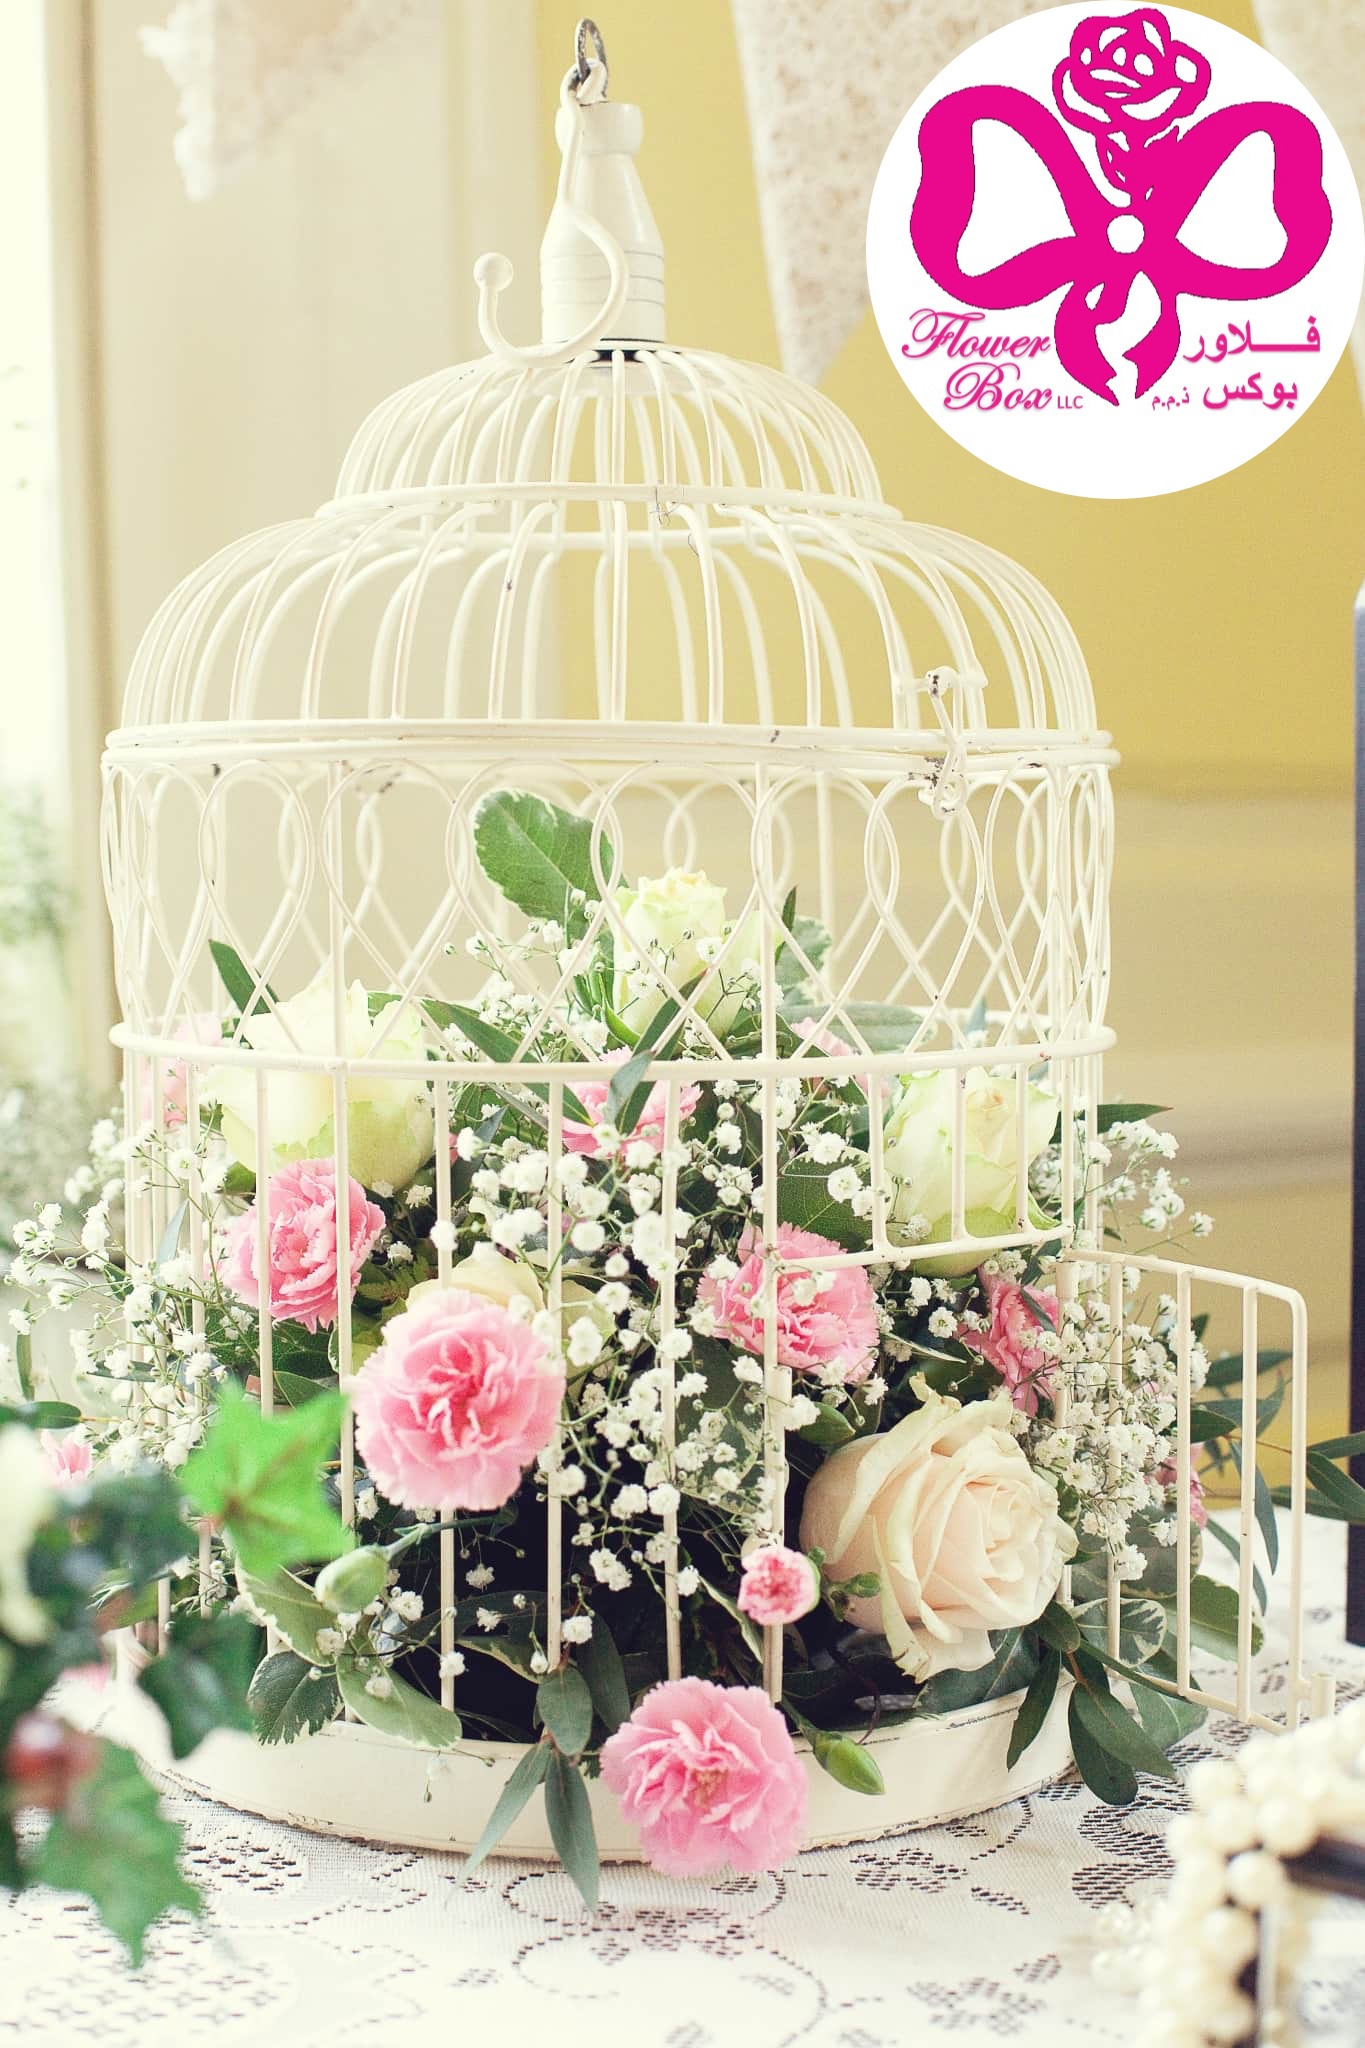 Bird Cage - With Flowers